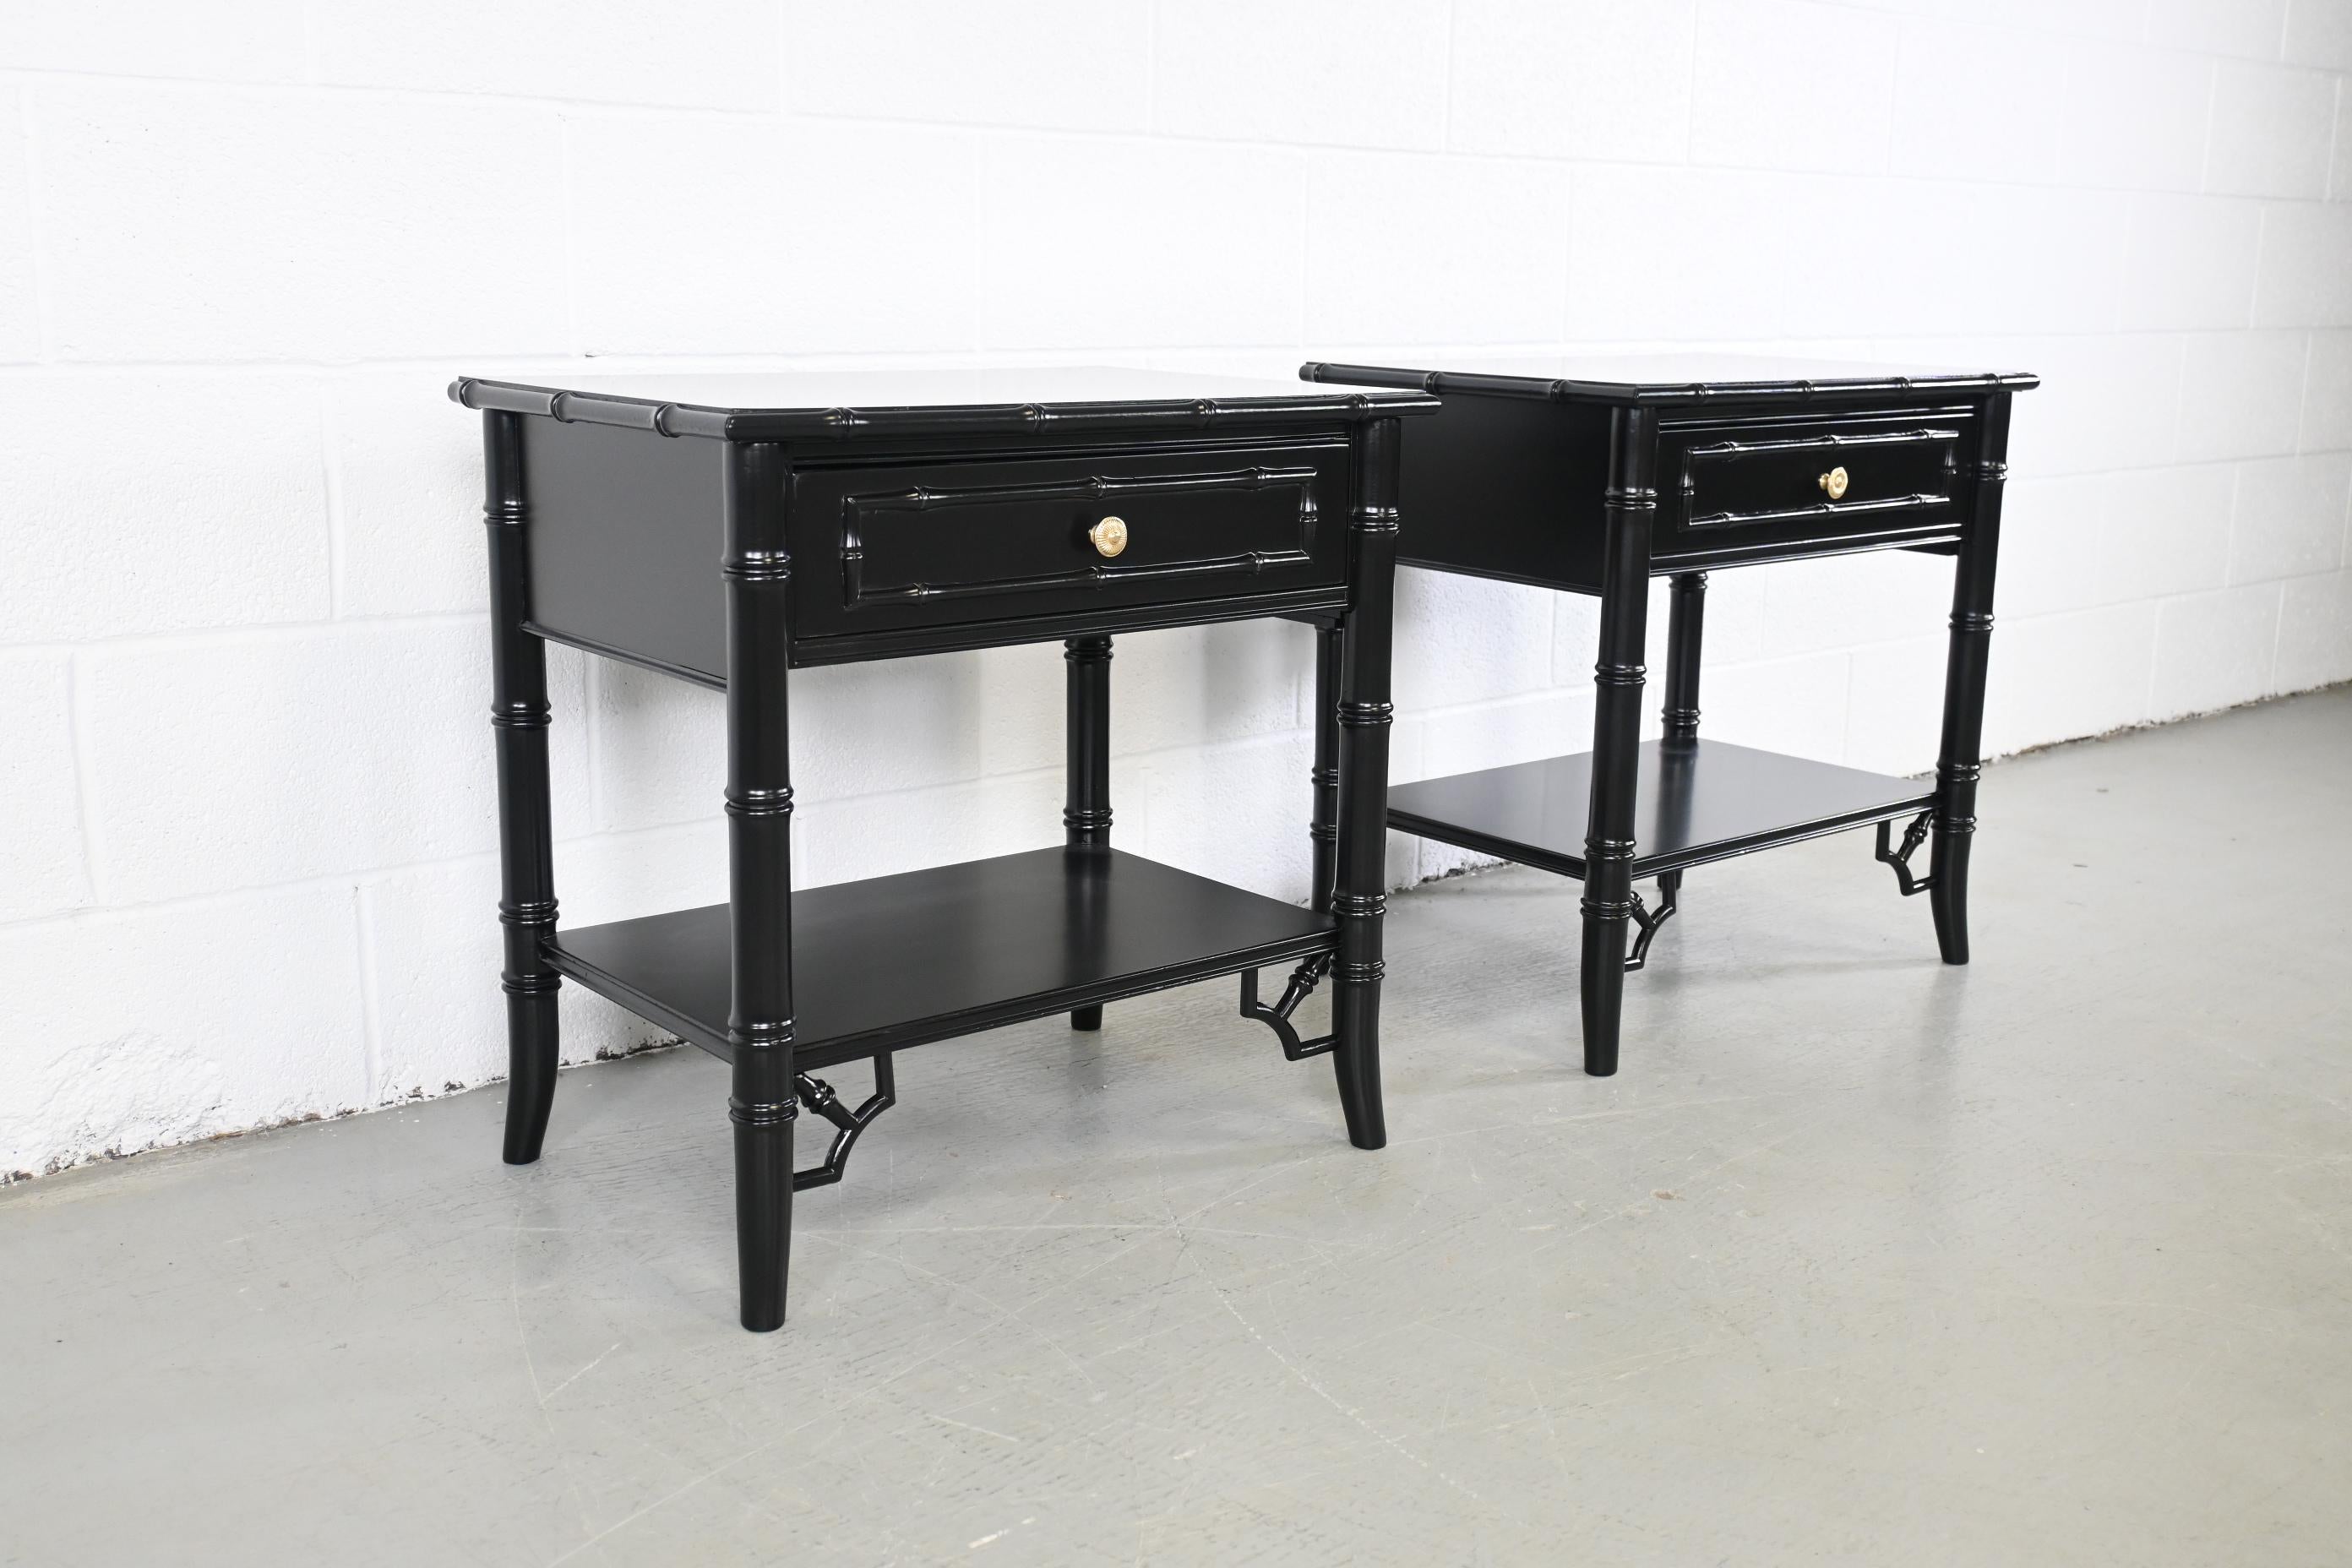 Thomasville Furniture Allegro Mid Century Faux Bamboo Black Lacquered pair of nightstands

Thomasville Furniture, USA, 1970s

24.25 Wide x 16.25 Deep x 23.75 High.

Hollywood Regency style Mid-Century Modern black lacquered faux bamboo pair of